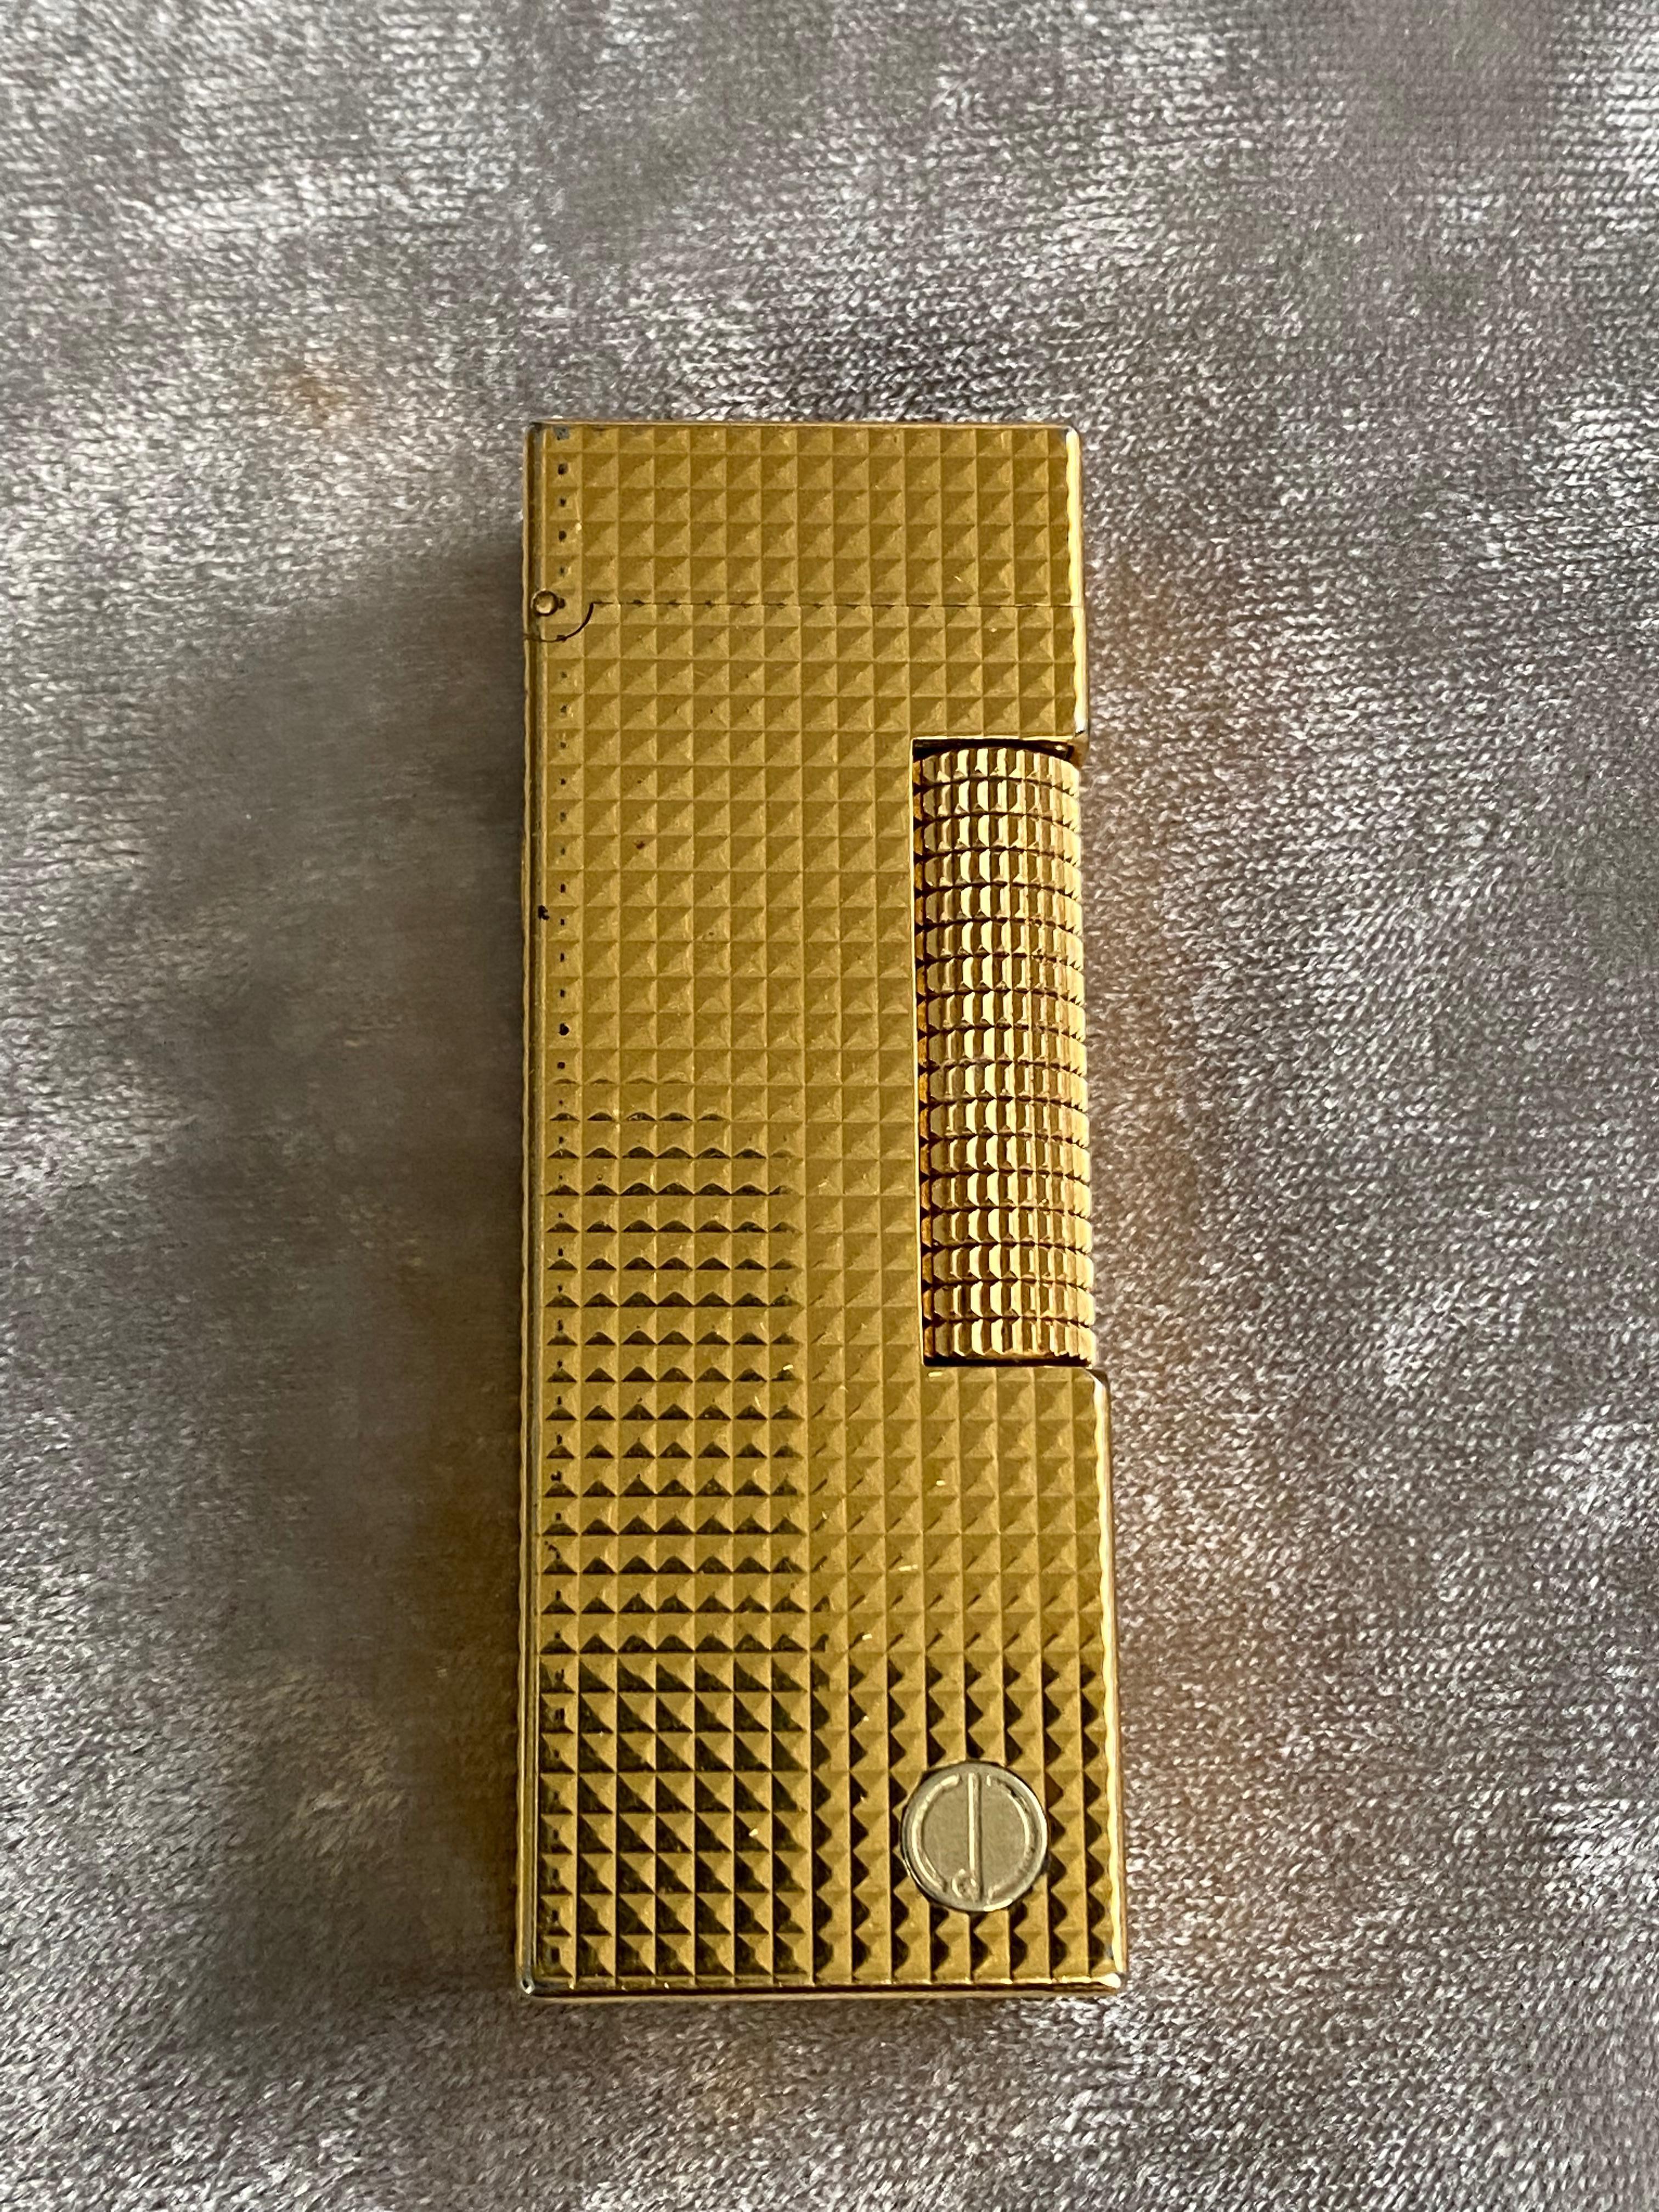 A Dunhill gold-plated mid century cigarette lighter, barley engine turned design.
Mid-Century Modern Lighter by Dunhill Rollagas Rulerlite, c1970 in mint condition. 
Almost as new. 
Please note that the lighters can not be shipped with fluid. 